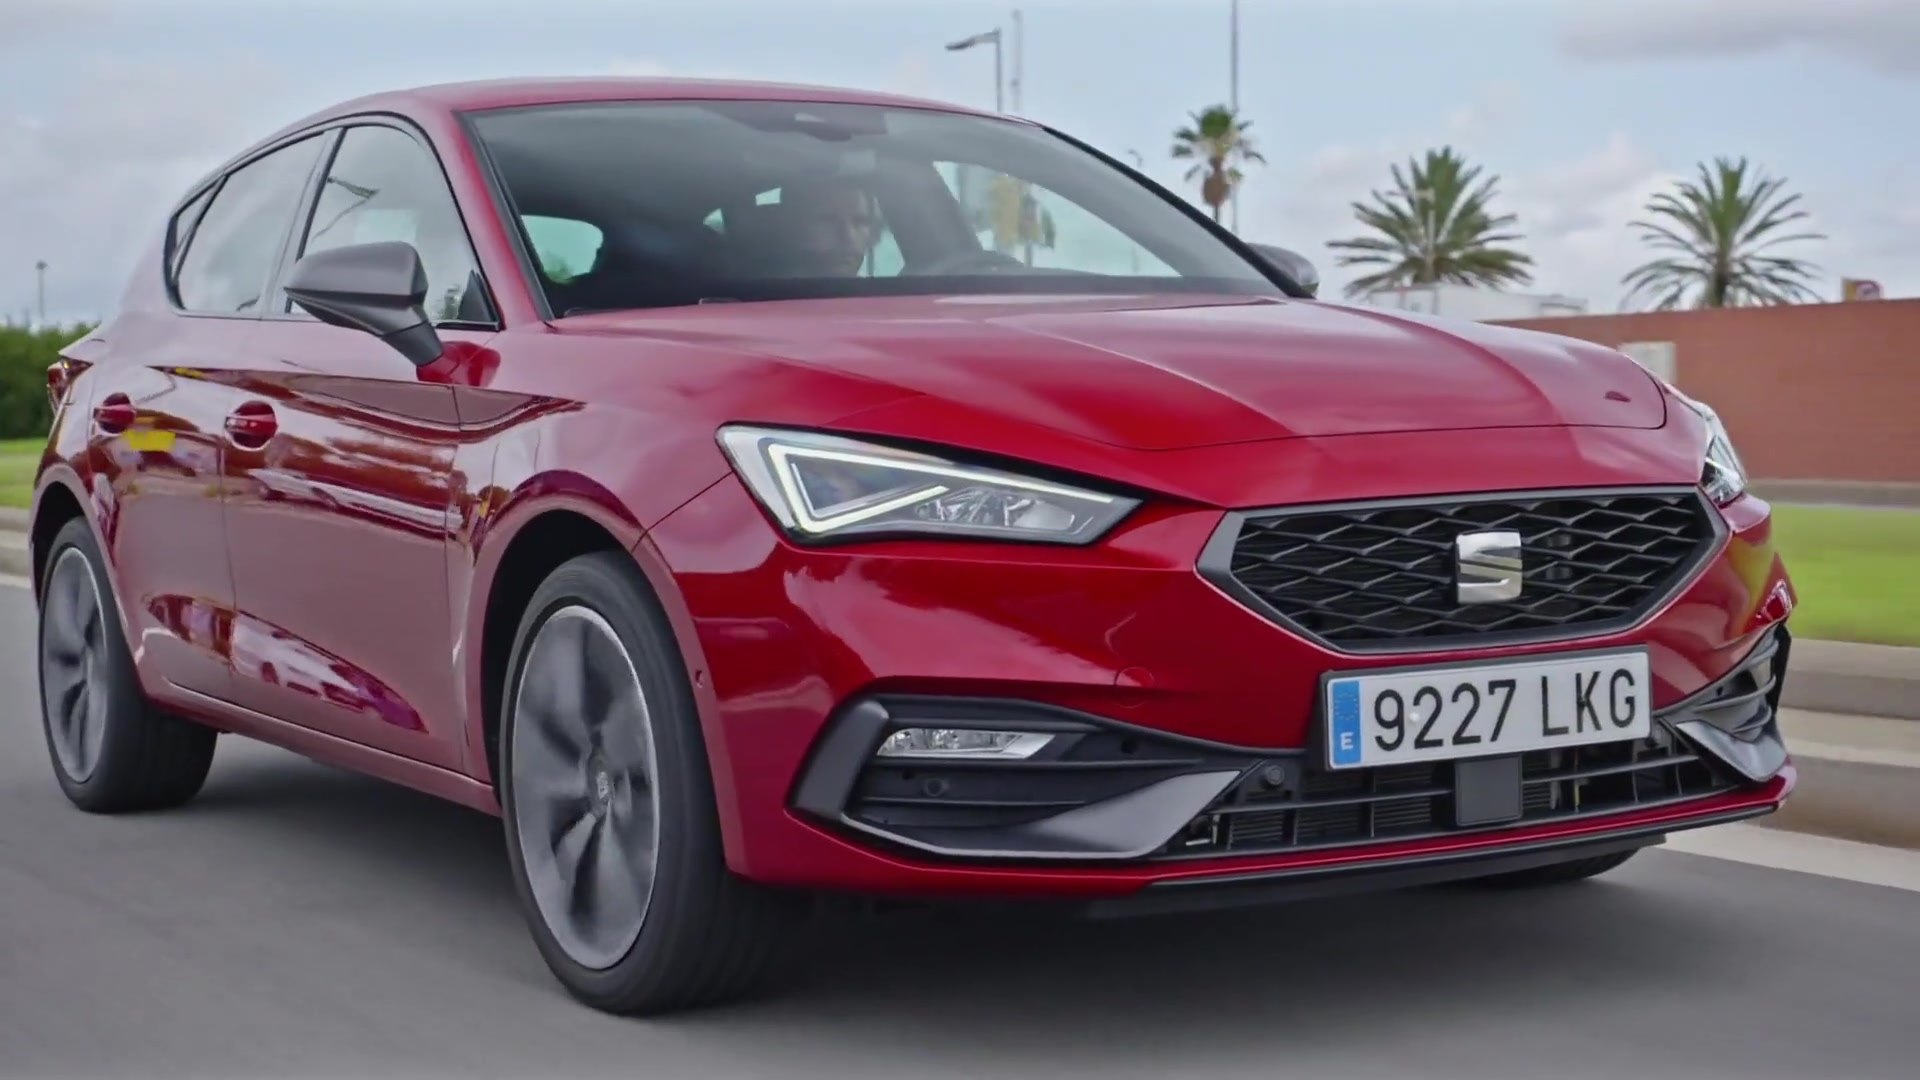 New SEAT Leon e-HYBRID in Desire Red Driving - video Dailymotion